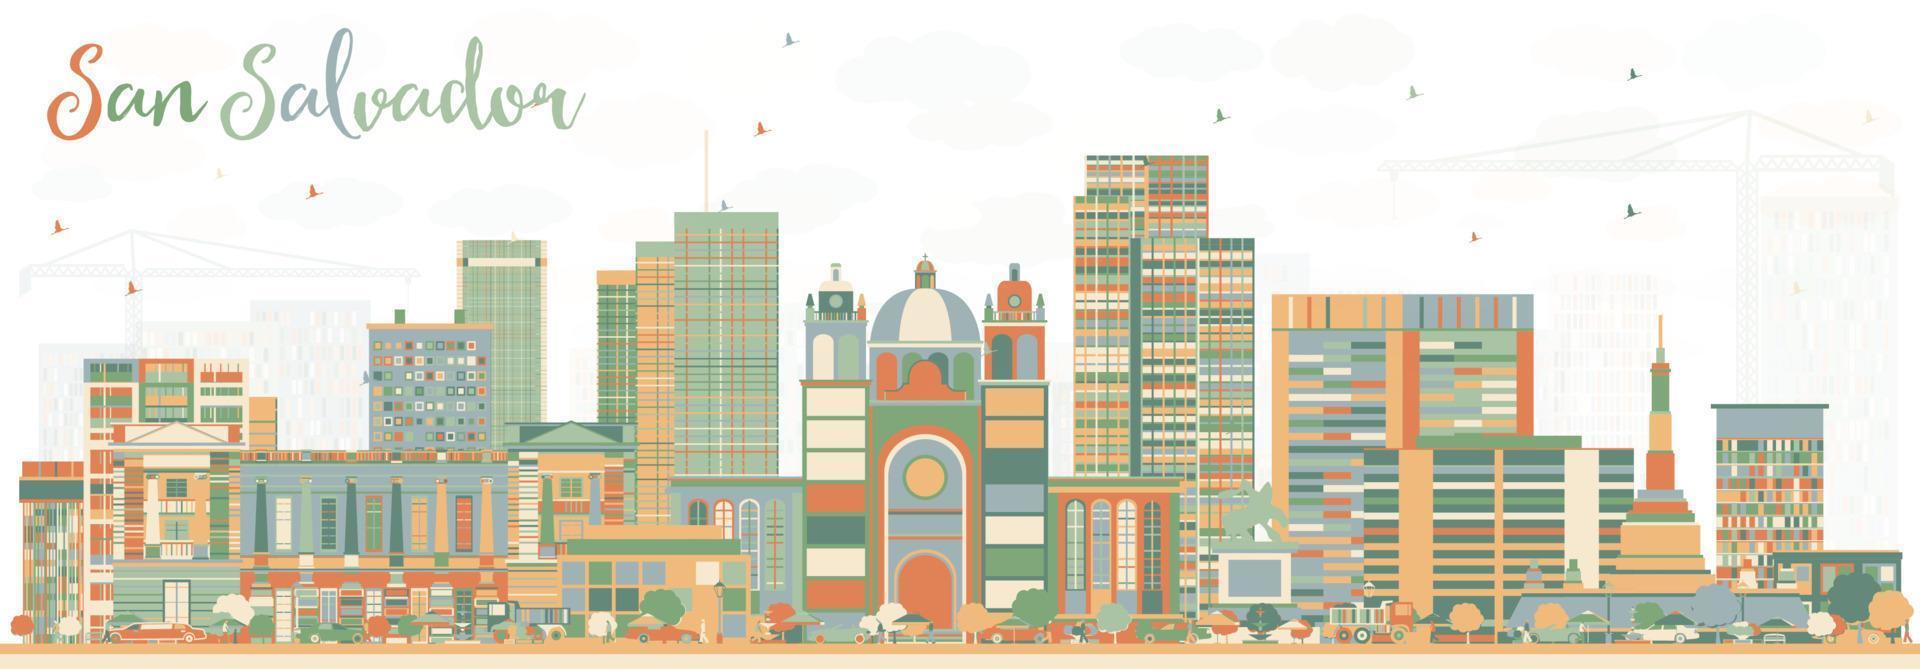 Abstract San Salvador Skyline with Color Buildings. vector